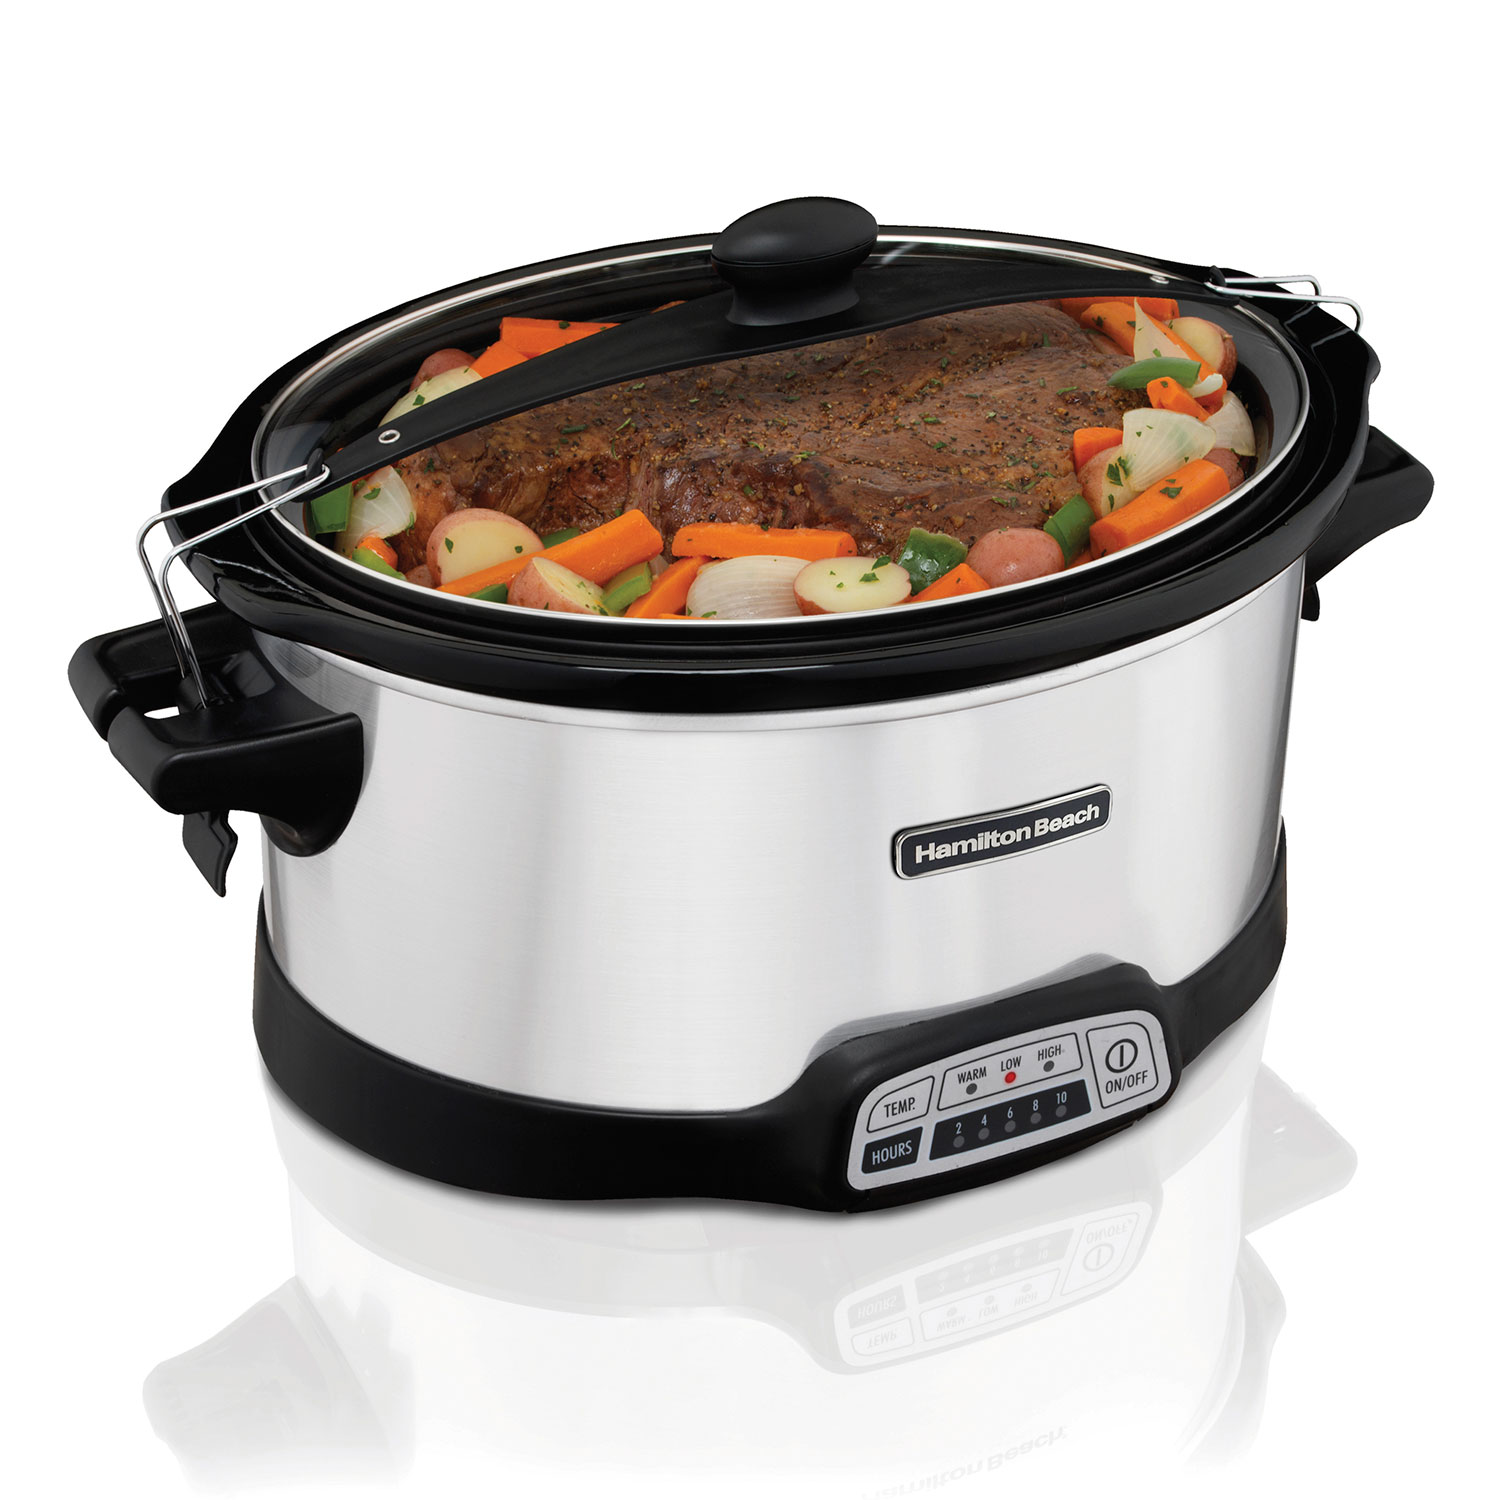 Stay or Go® Programmable Slow Cooker, Silver (33576FG)